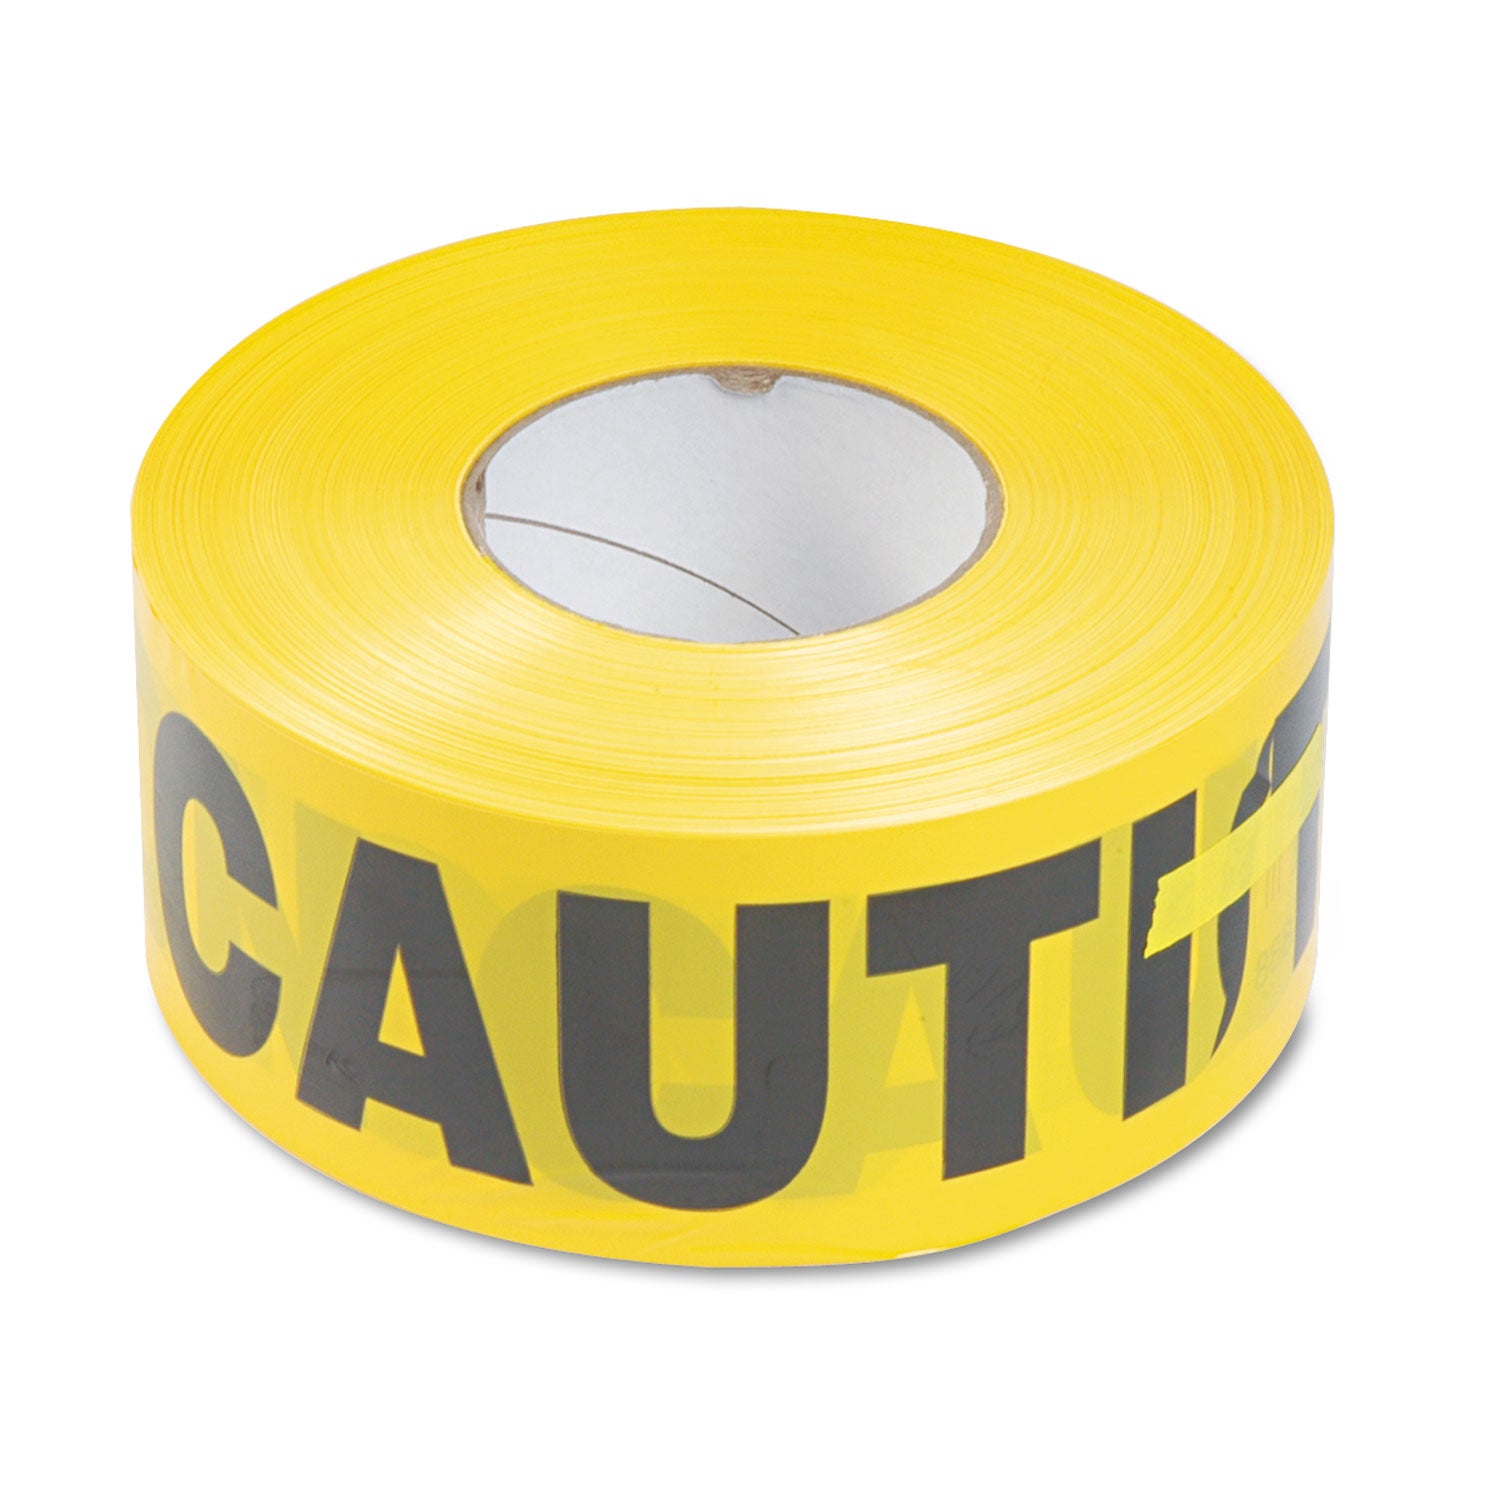 Caution Barricade Safety Tape, 3" x 1,000 ft, Black/Yellow - 